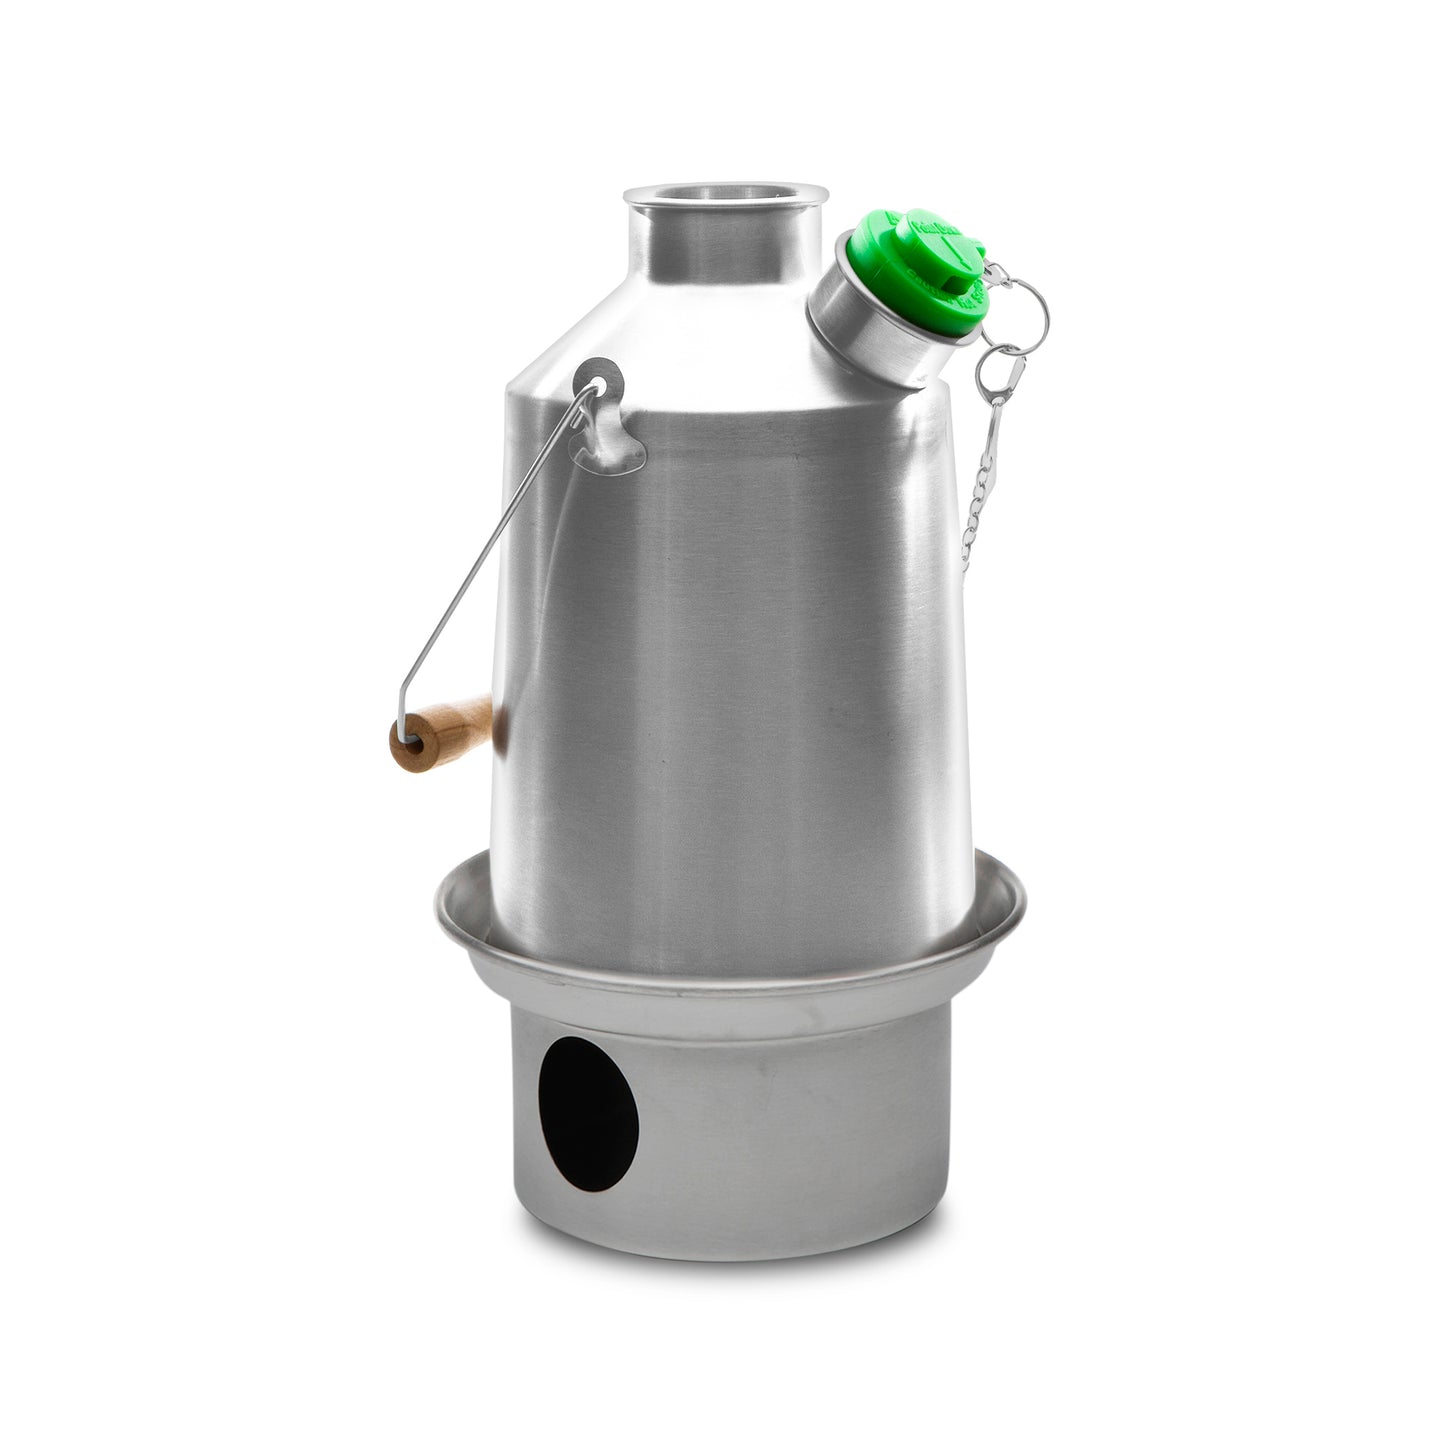 Kelly Kettle® Scout – Medium Stainless Steel Camp Kettle